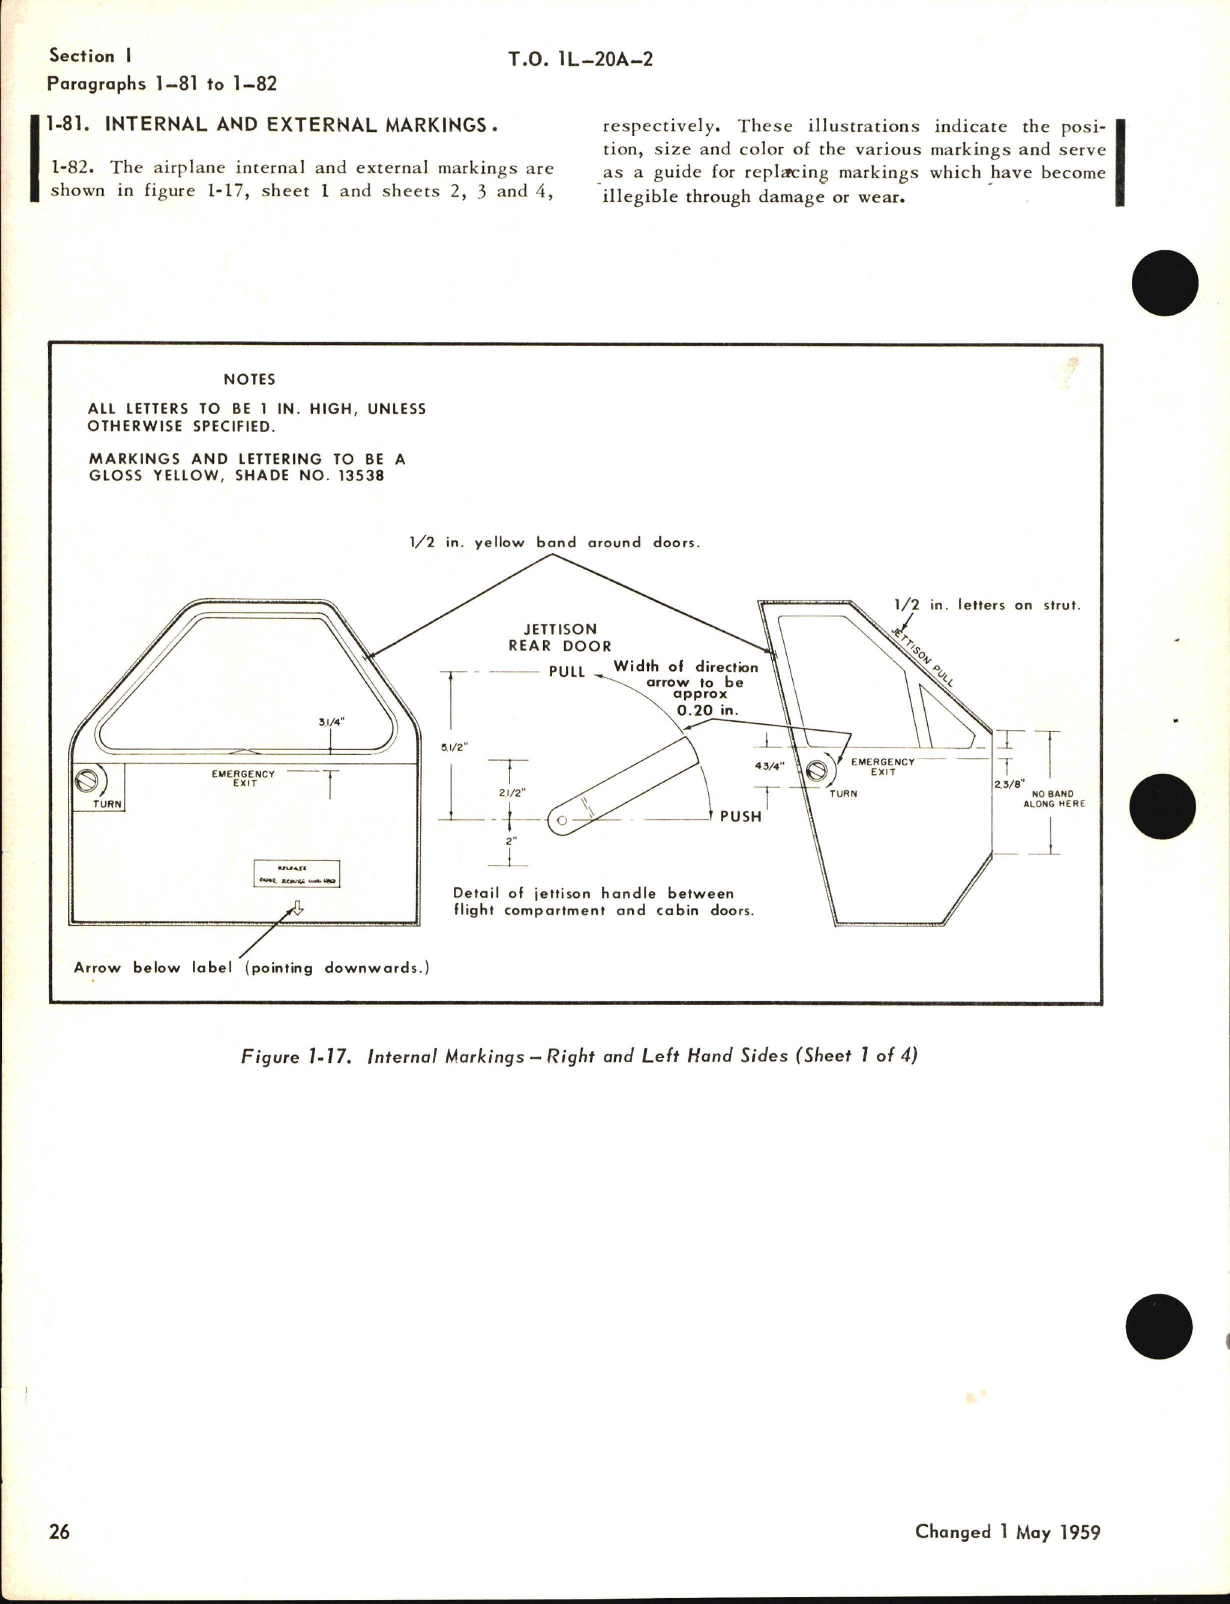 Sample page 6 from AirCorps Library document: Maintenance Instructions for U-6A